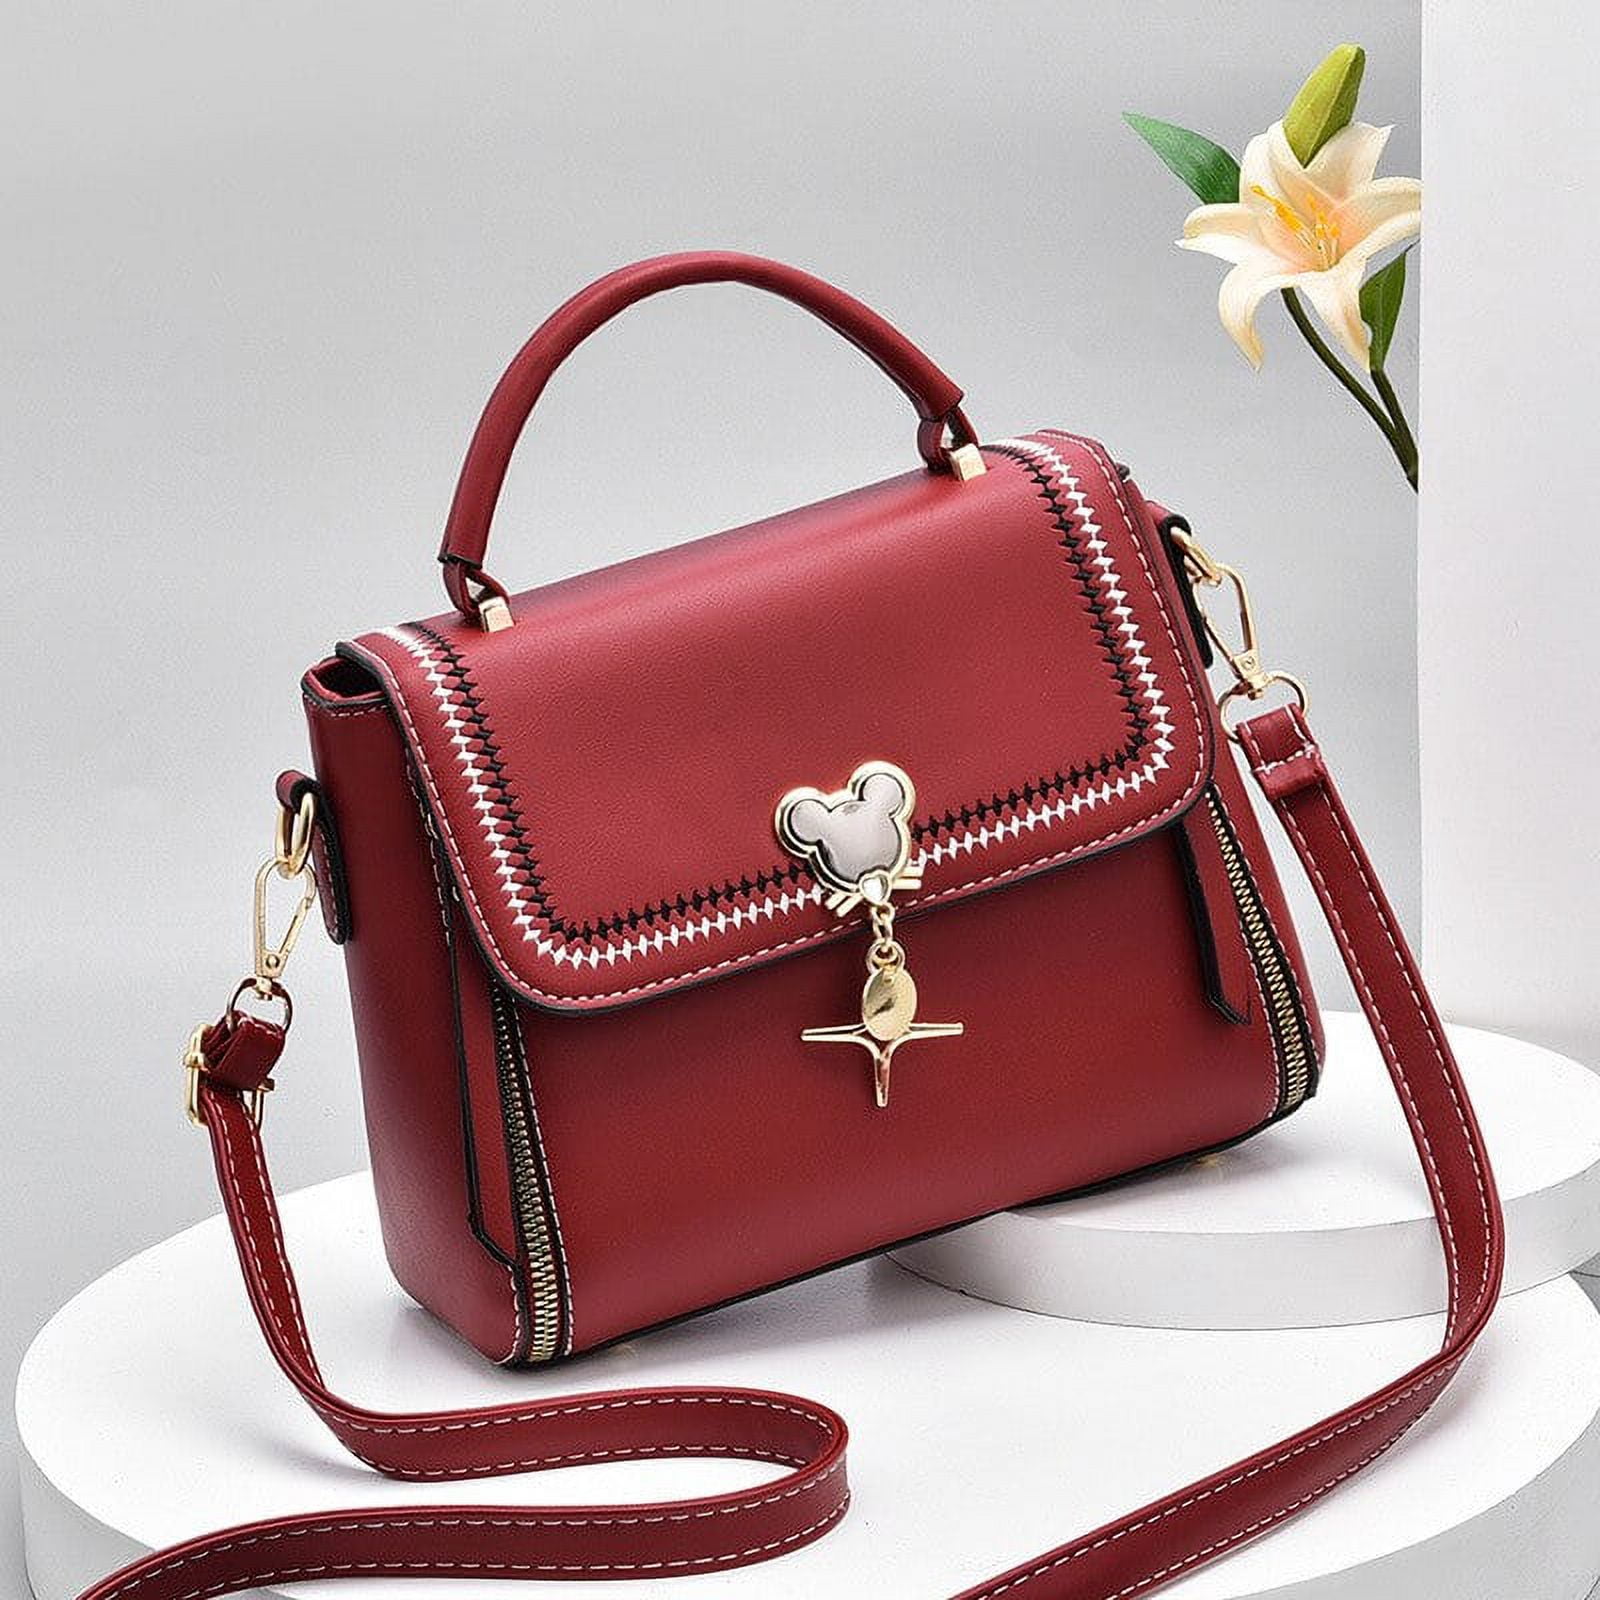 CoCopeaunt Candy Color Shoulder Bags For Women Solid Color Pu Leather Mini  Crossbody Bag Casual Female Messenger Handbag Purse Totes Clutch 